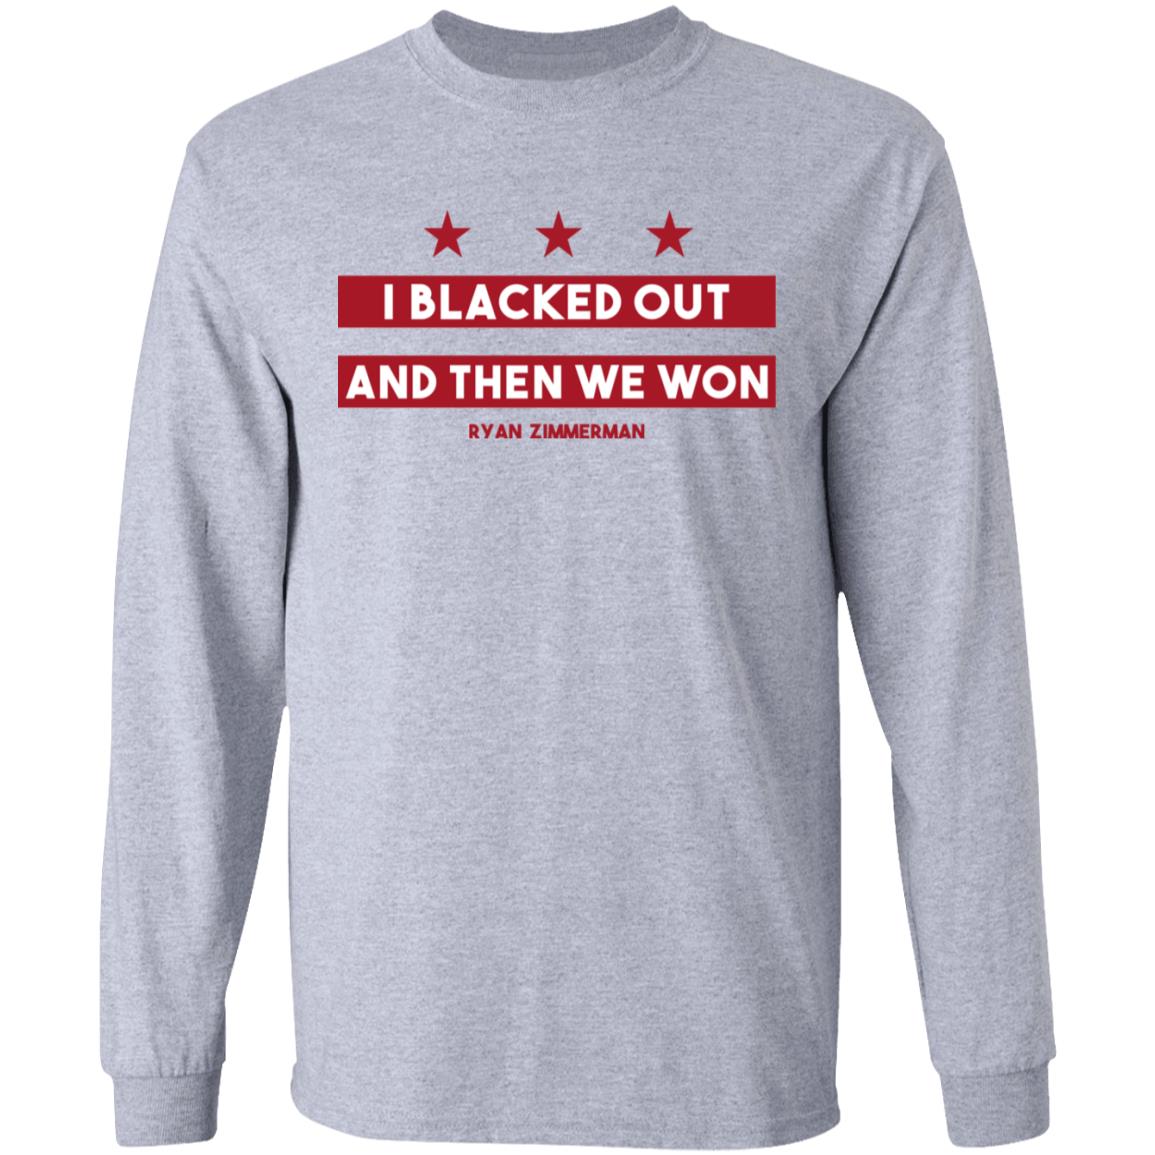 Ryan Zimmerman I Blacked Out And Then We Won Shirt